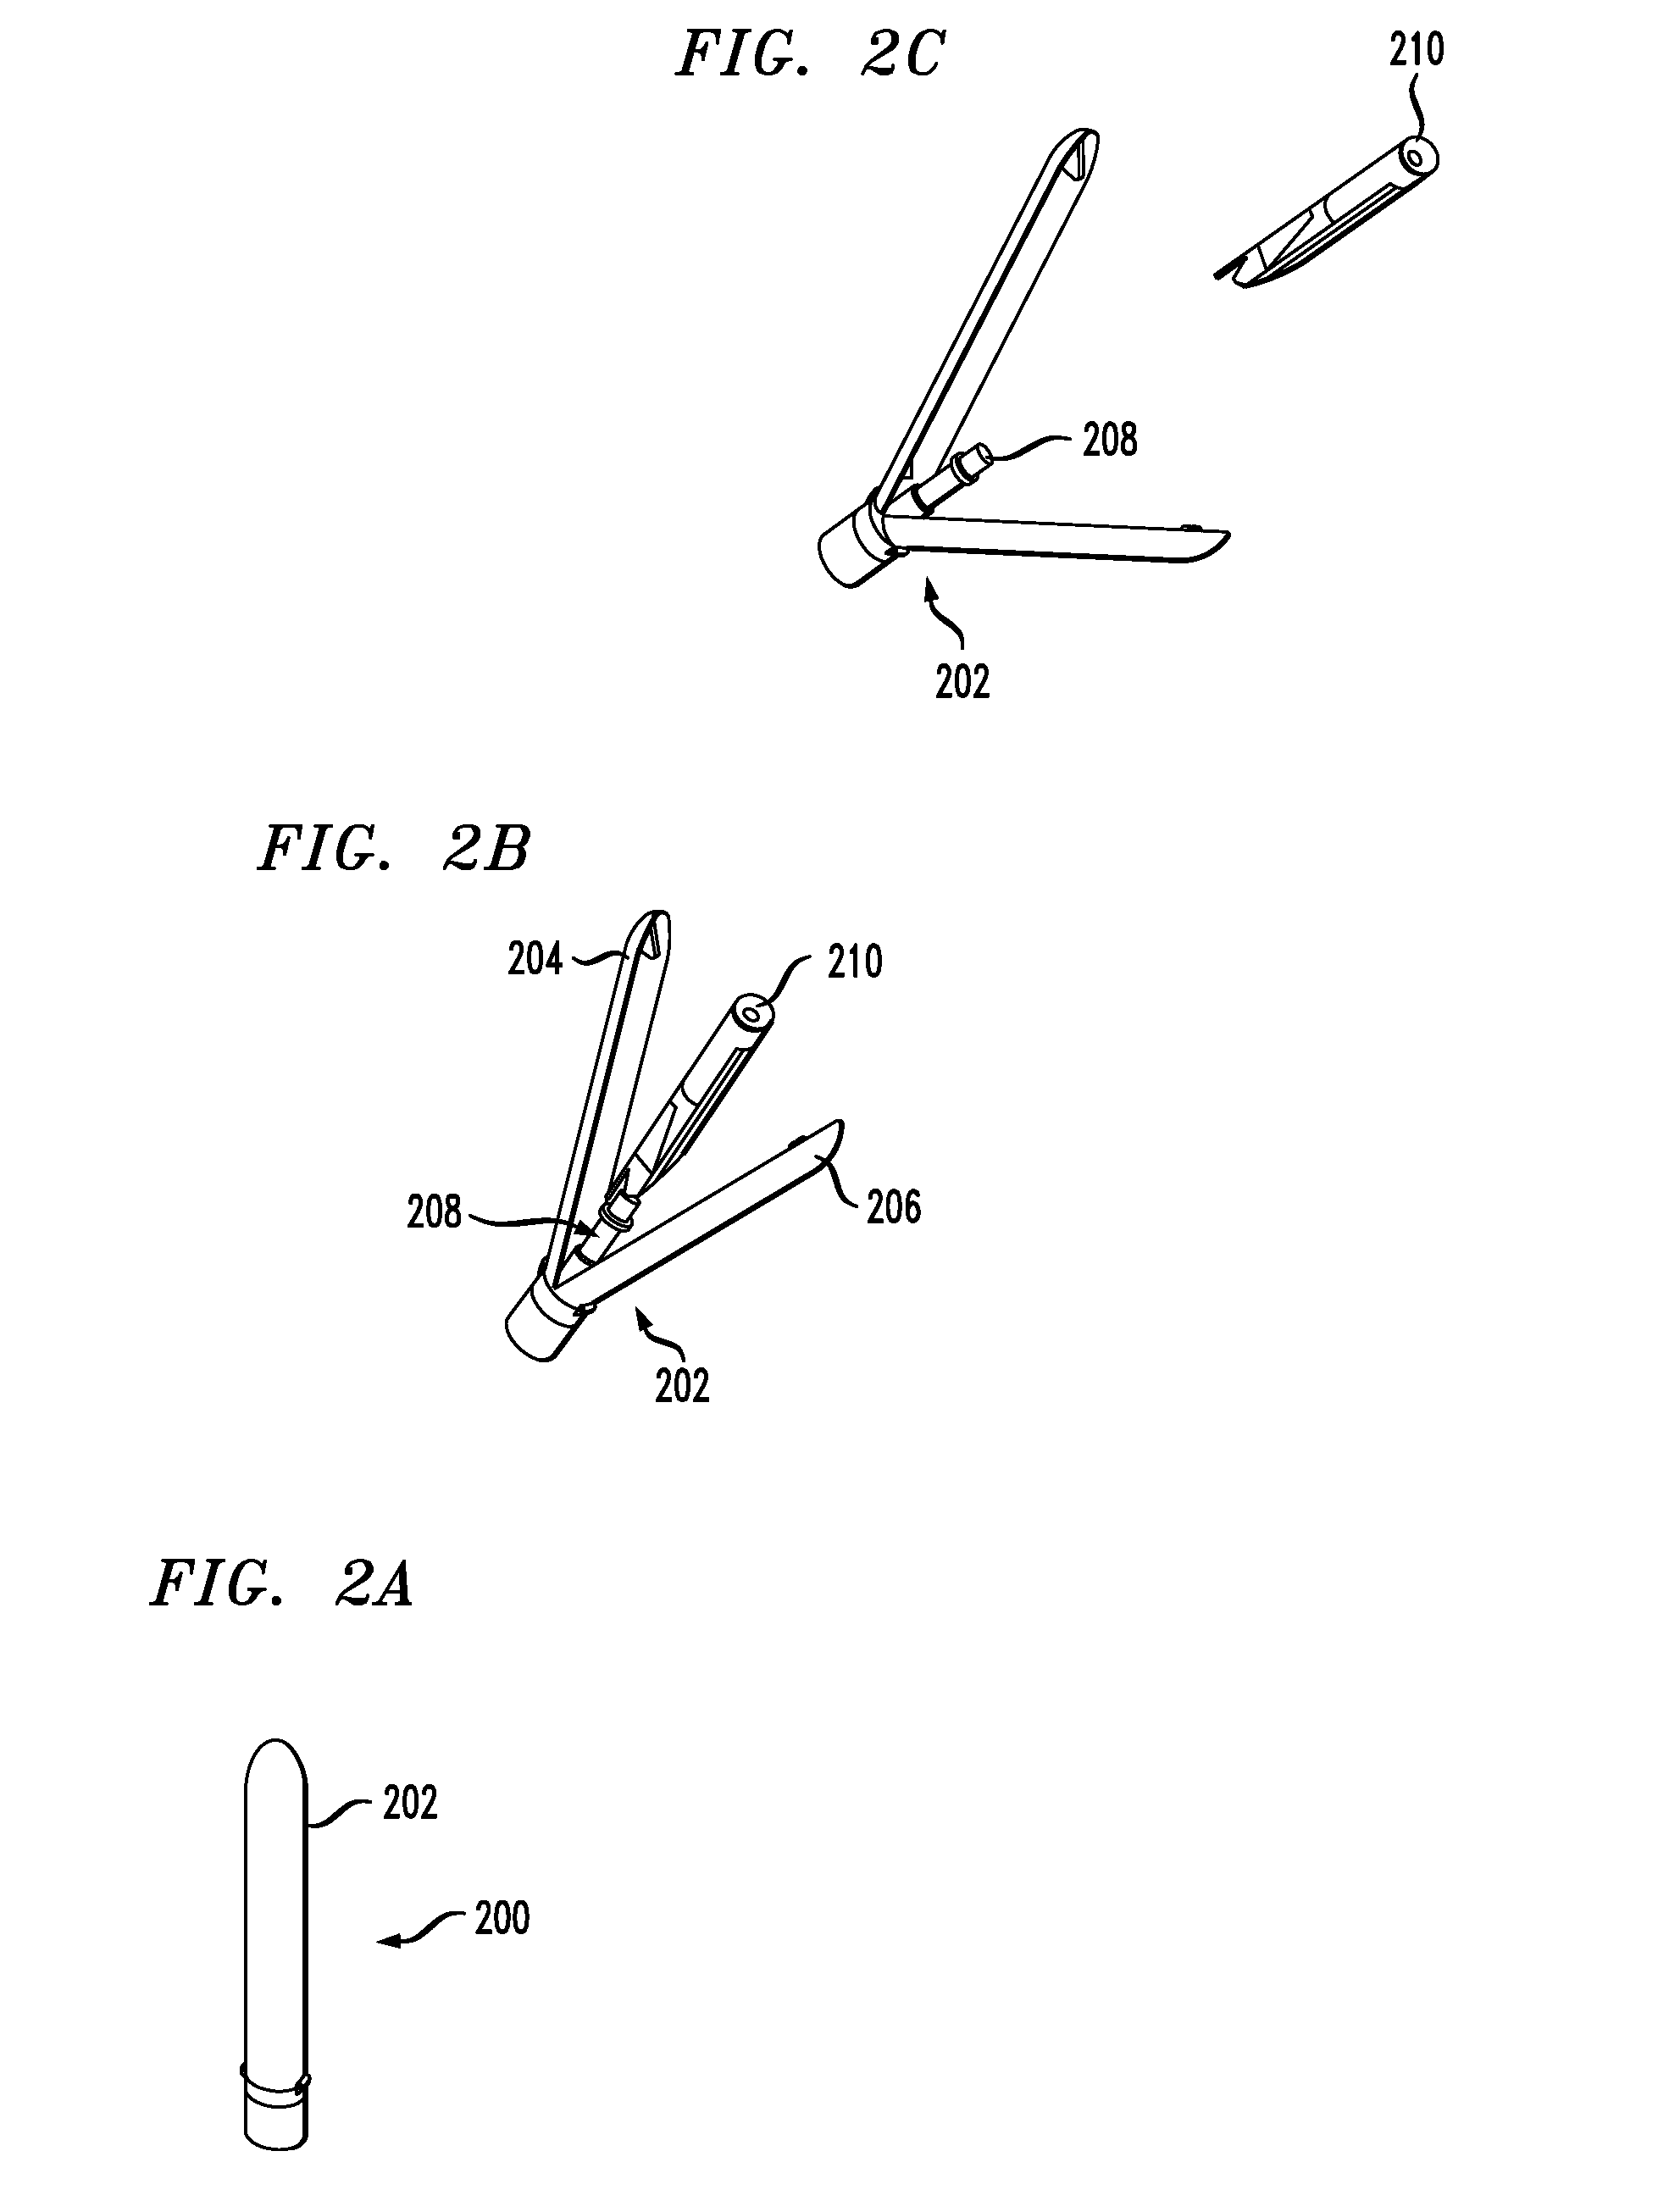 Apparatus comprising a payload ejection mechanism